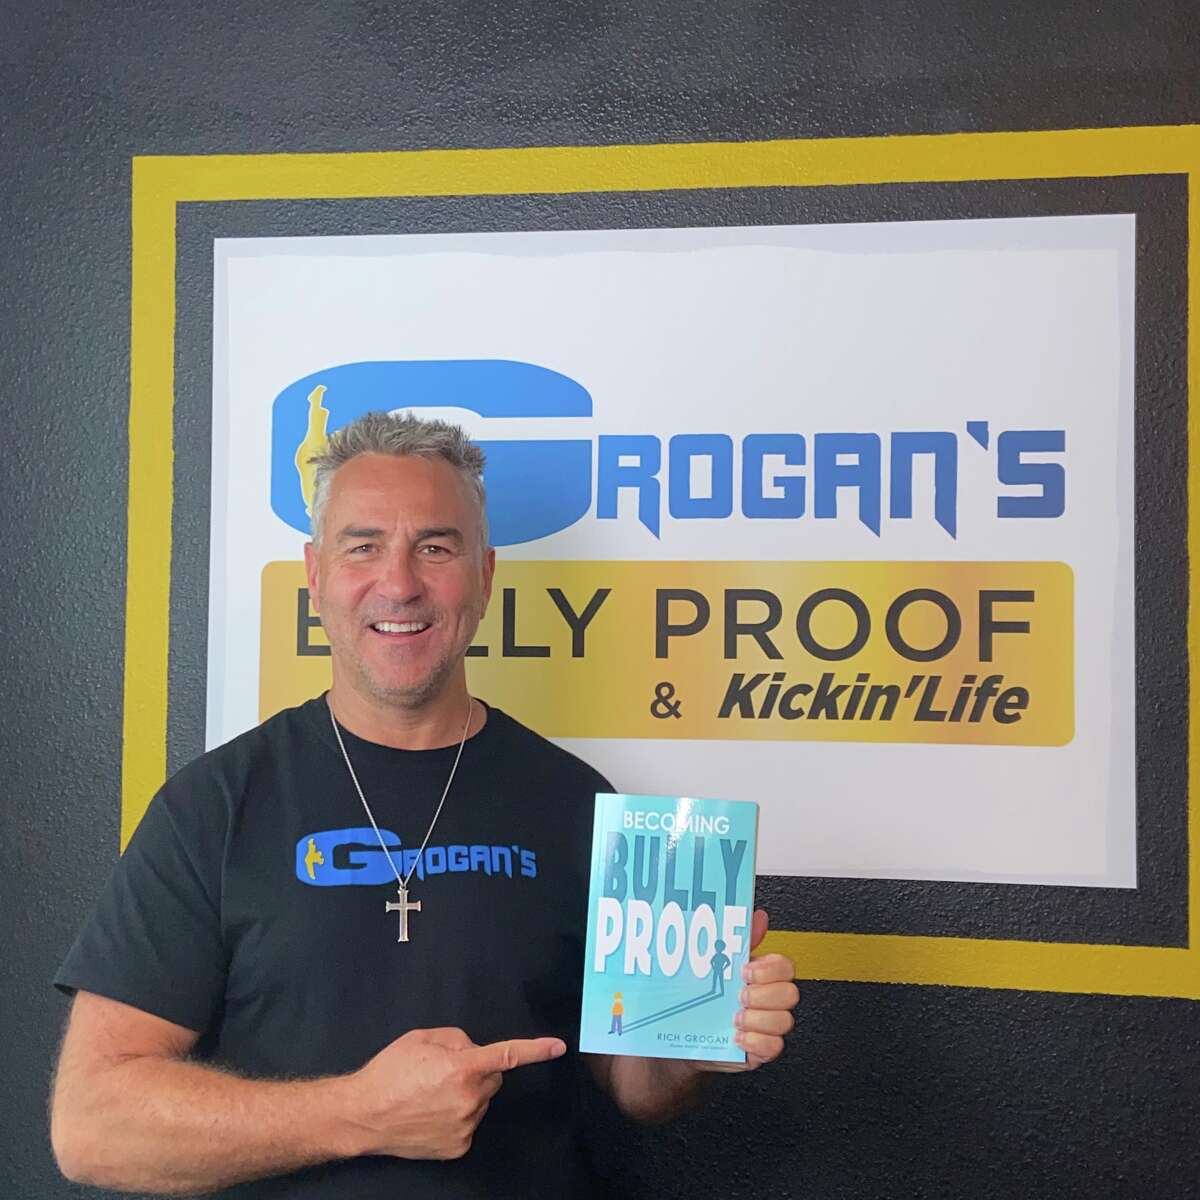 Join Grogan this Friday evening, May 13, at Grogan's Academy of Martial Arts located at 310 Hillsboro Ave. in Edwardsville for a book signing event.